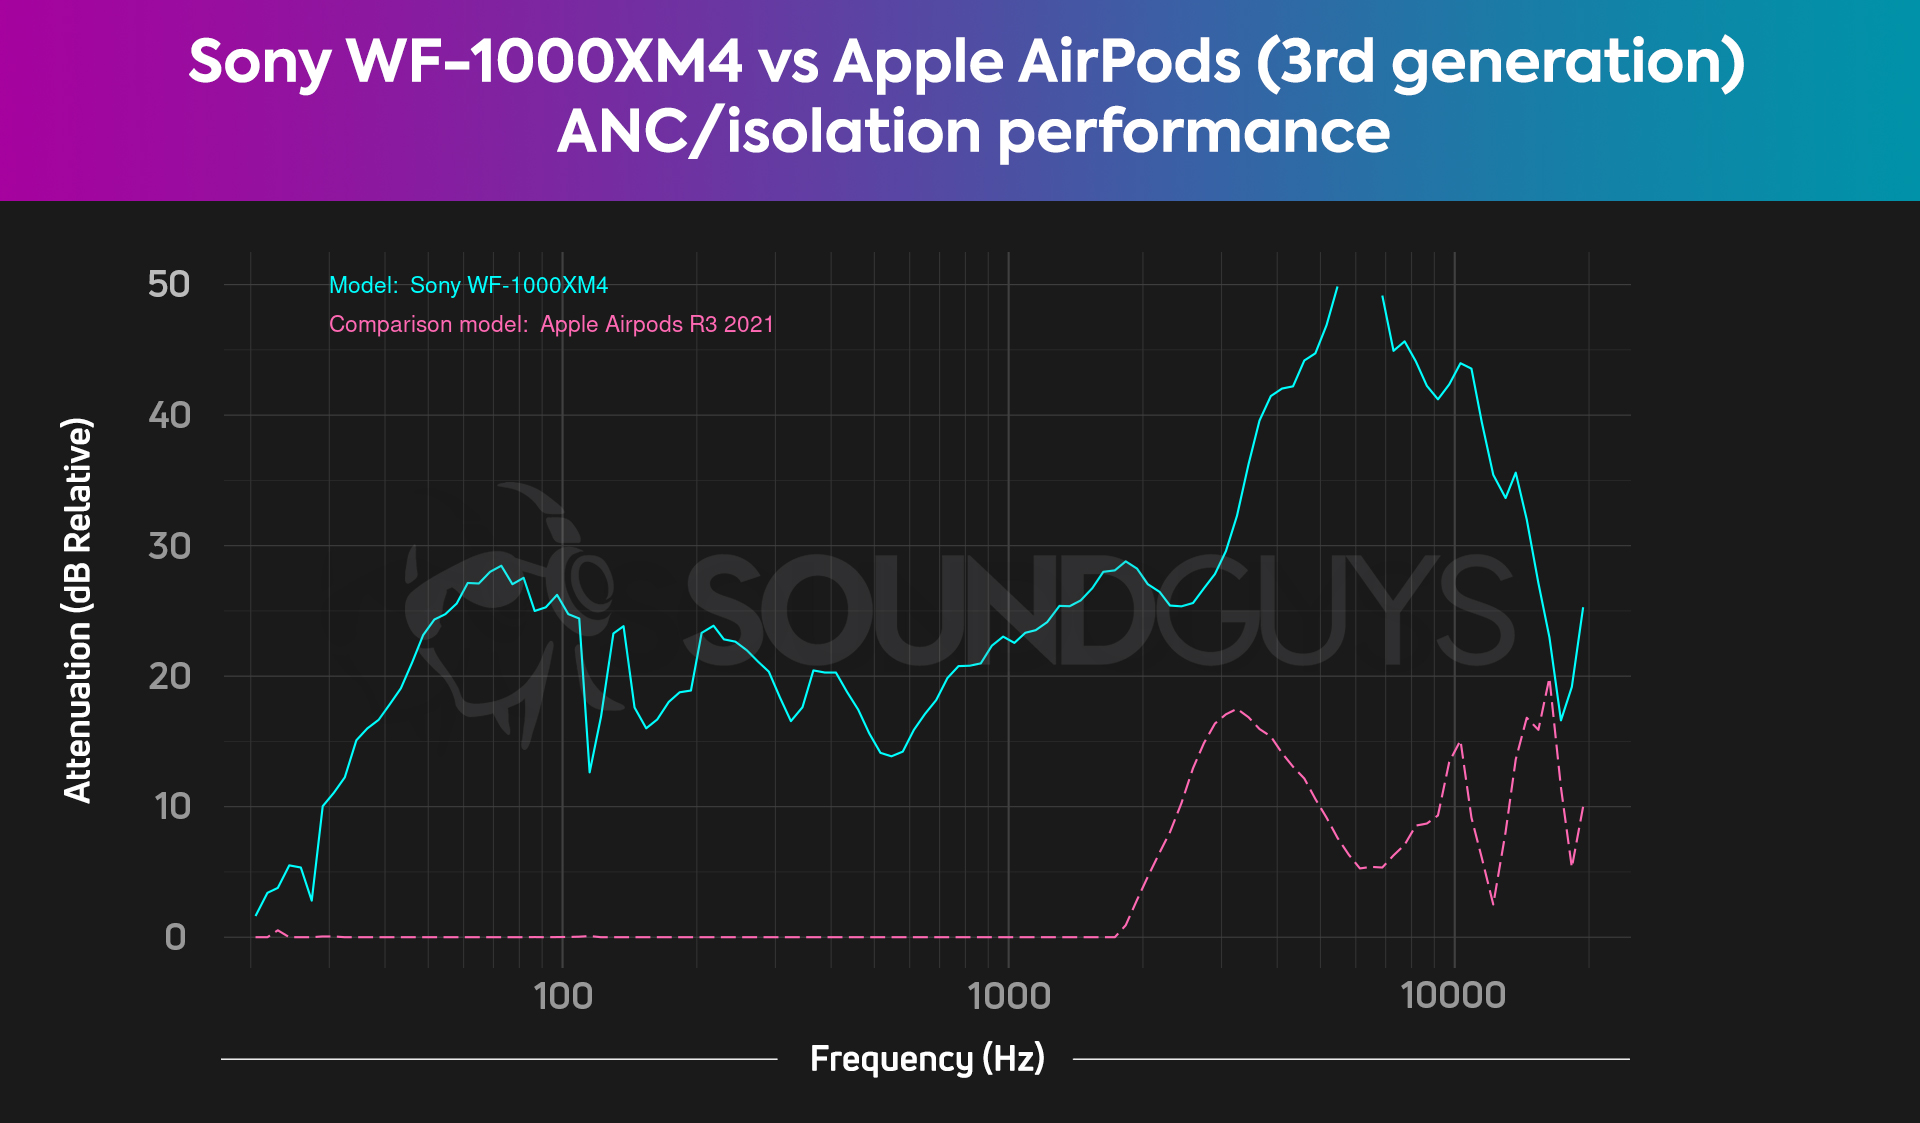 A chart depicting the combined ANC and isolation of the Sony WF-1000XM4 versus the isolation, or lack thereof, on the Apple AirPods (3rd generation).